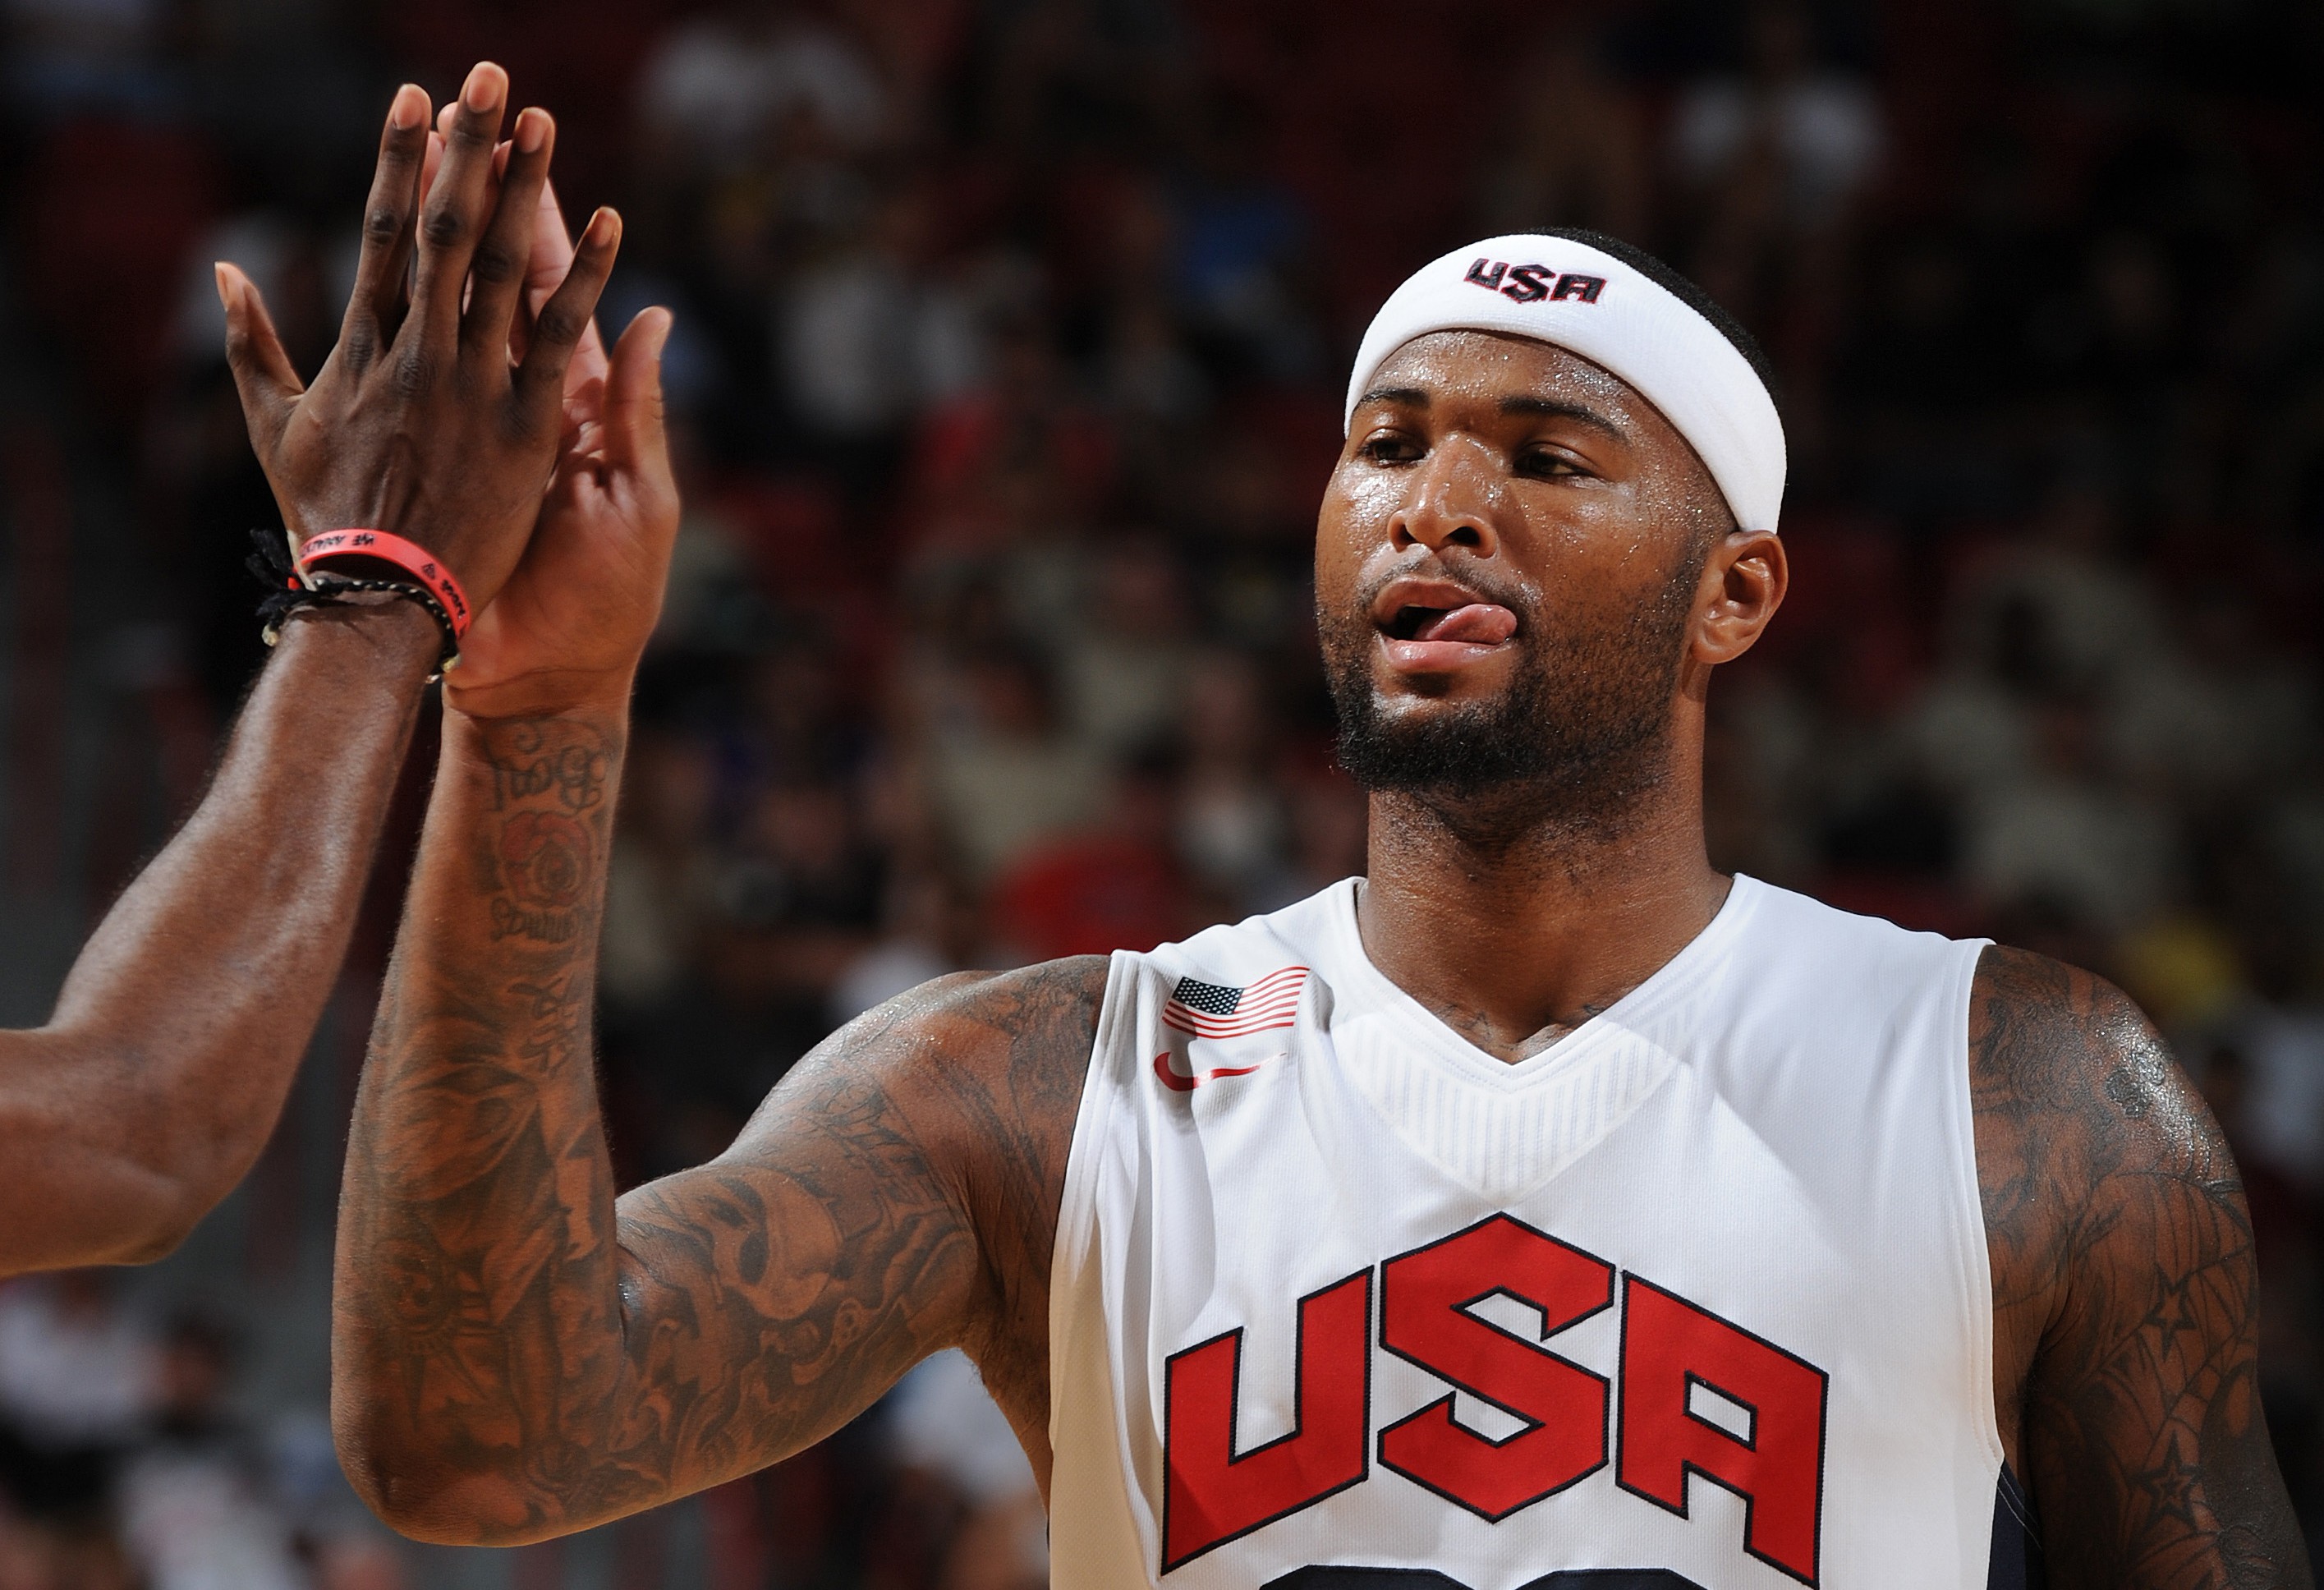 DeMarcus Cousins is NOT worried about the 49ers Photo: Getty Images